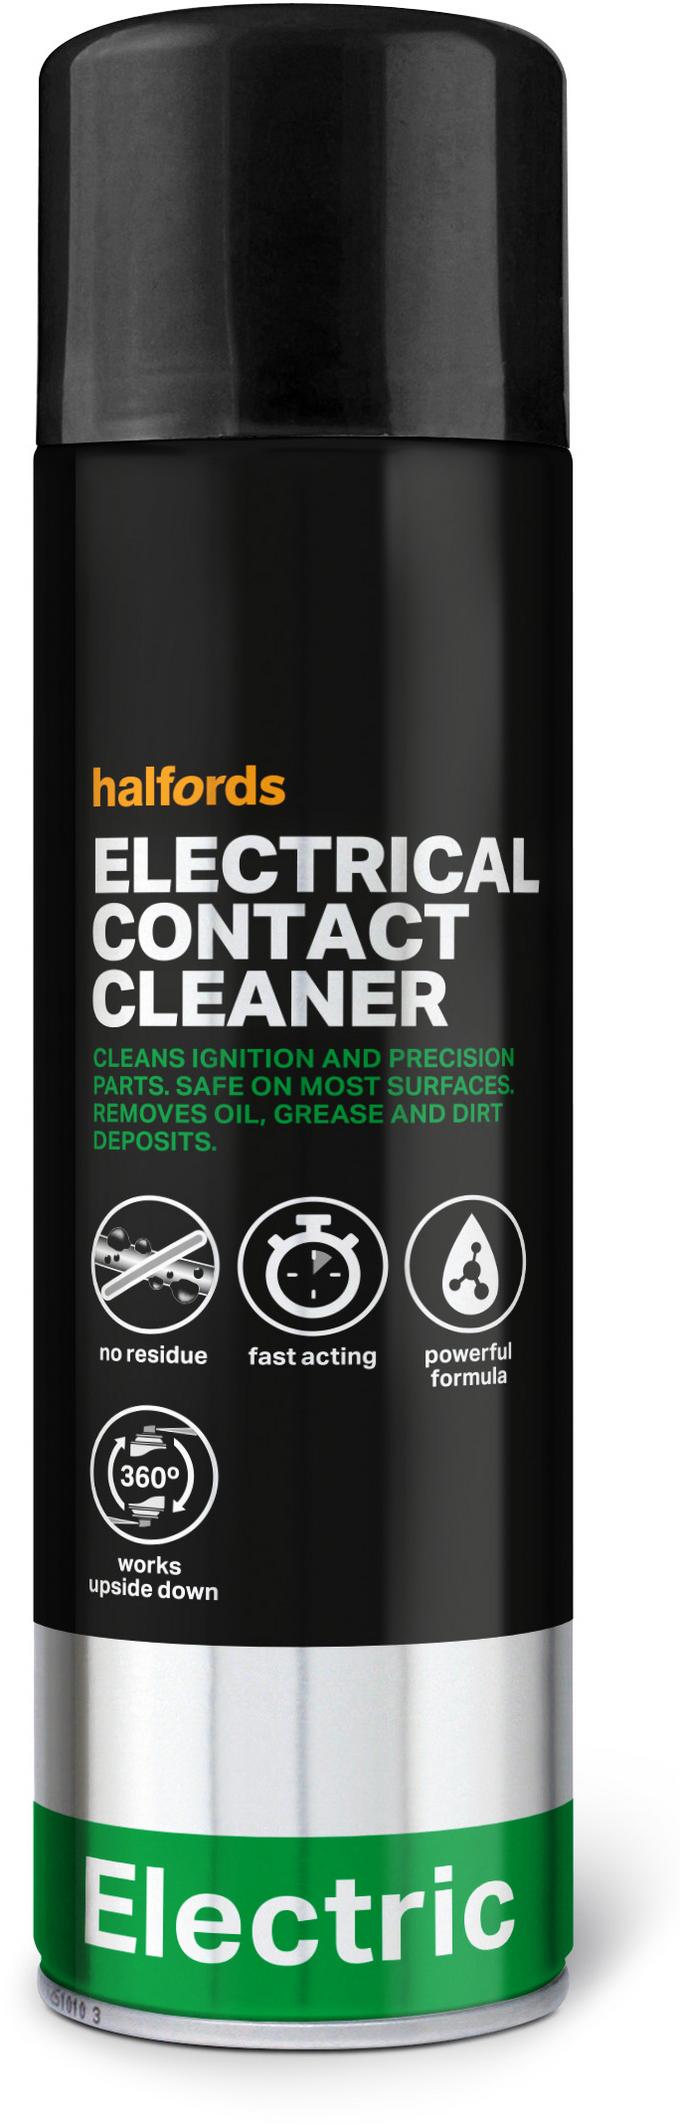 Perfect Contact Cleaner Spray for Electrical Conduction - 7Mart